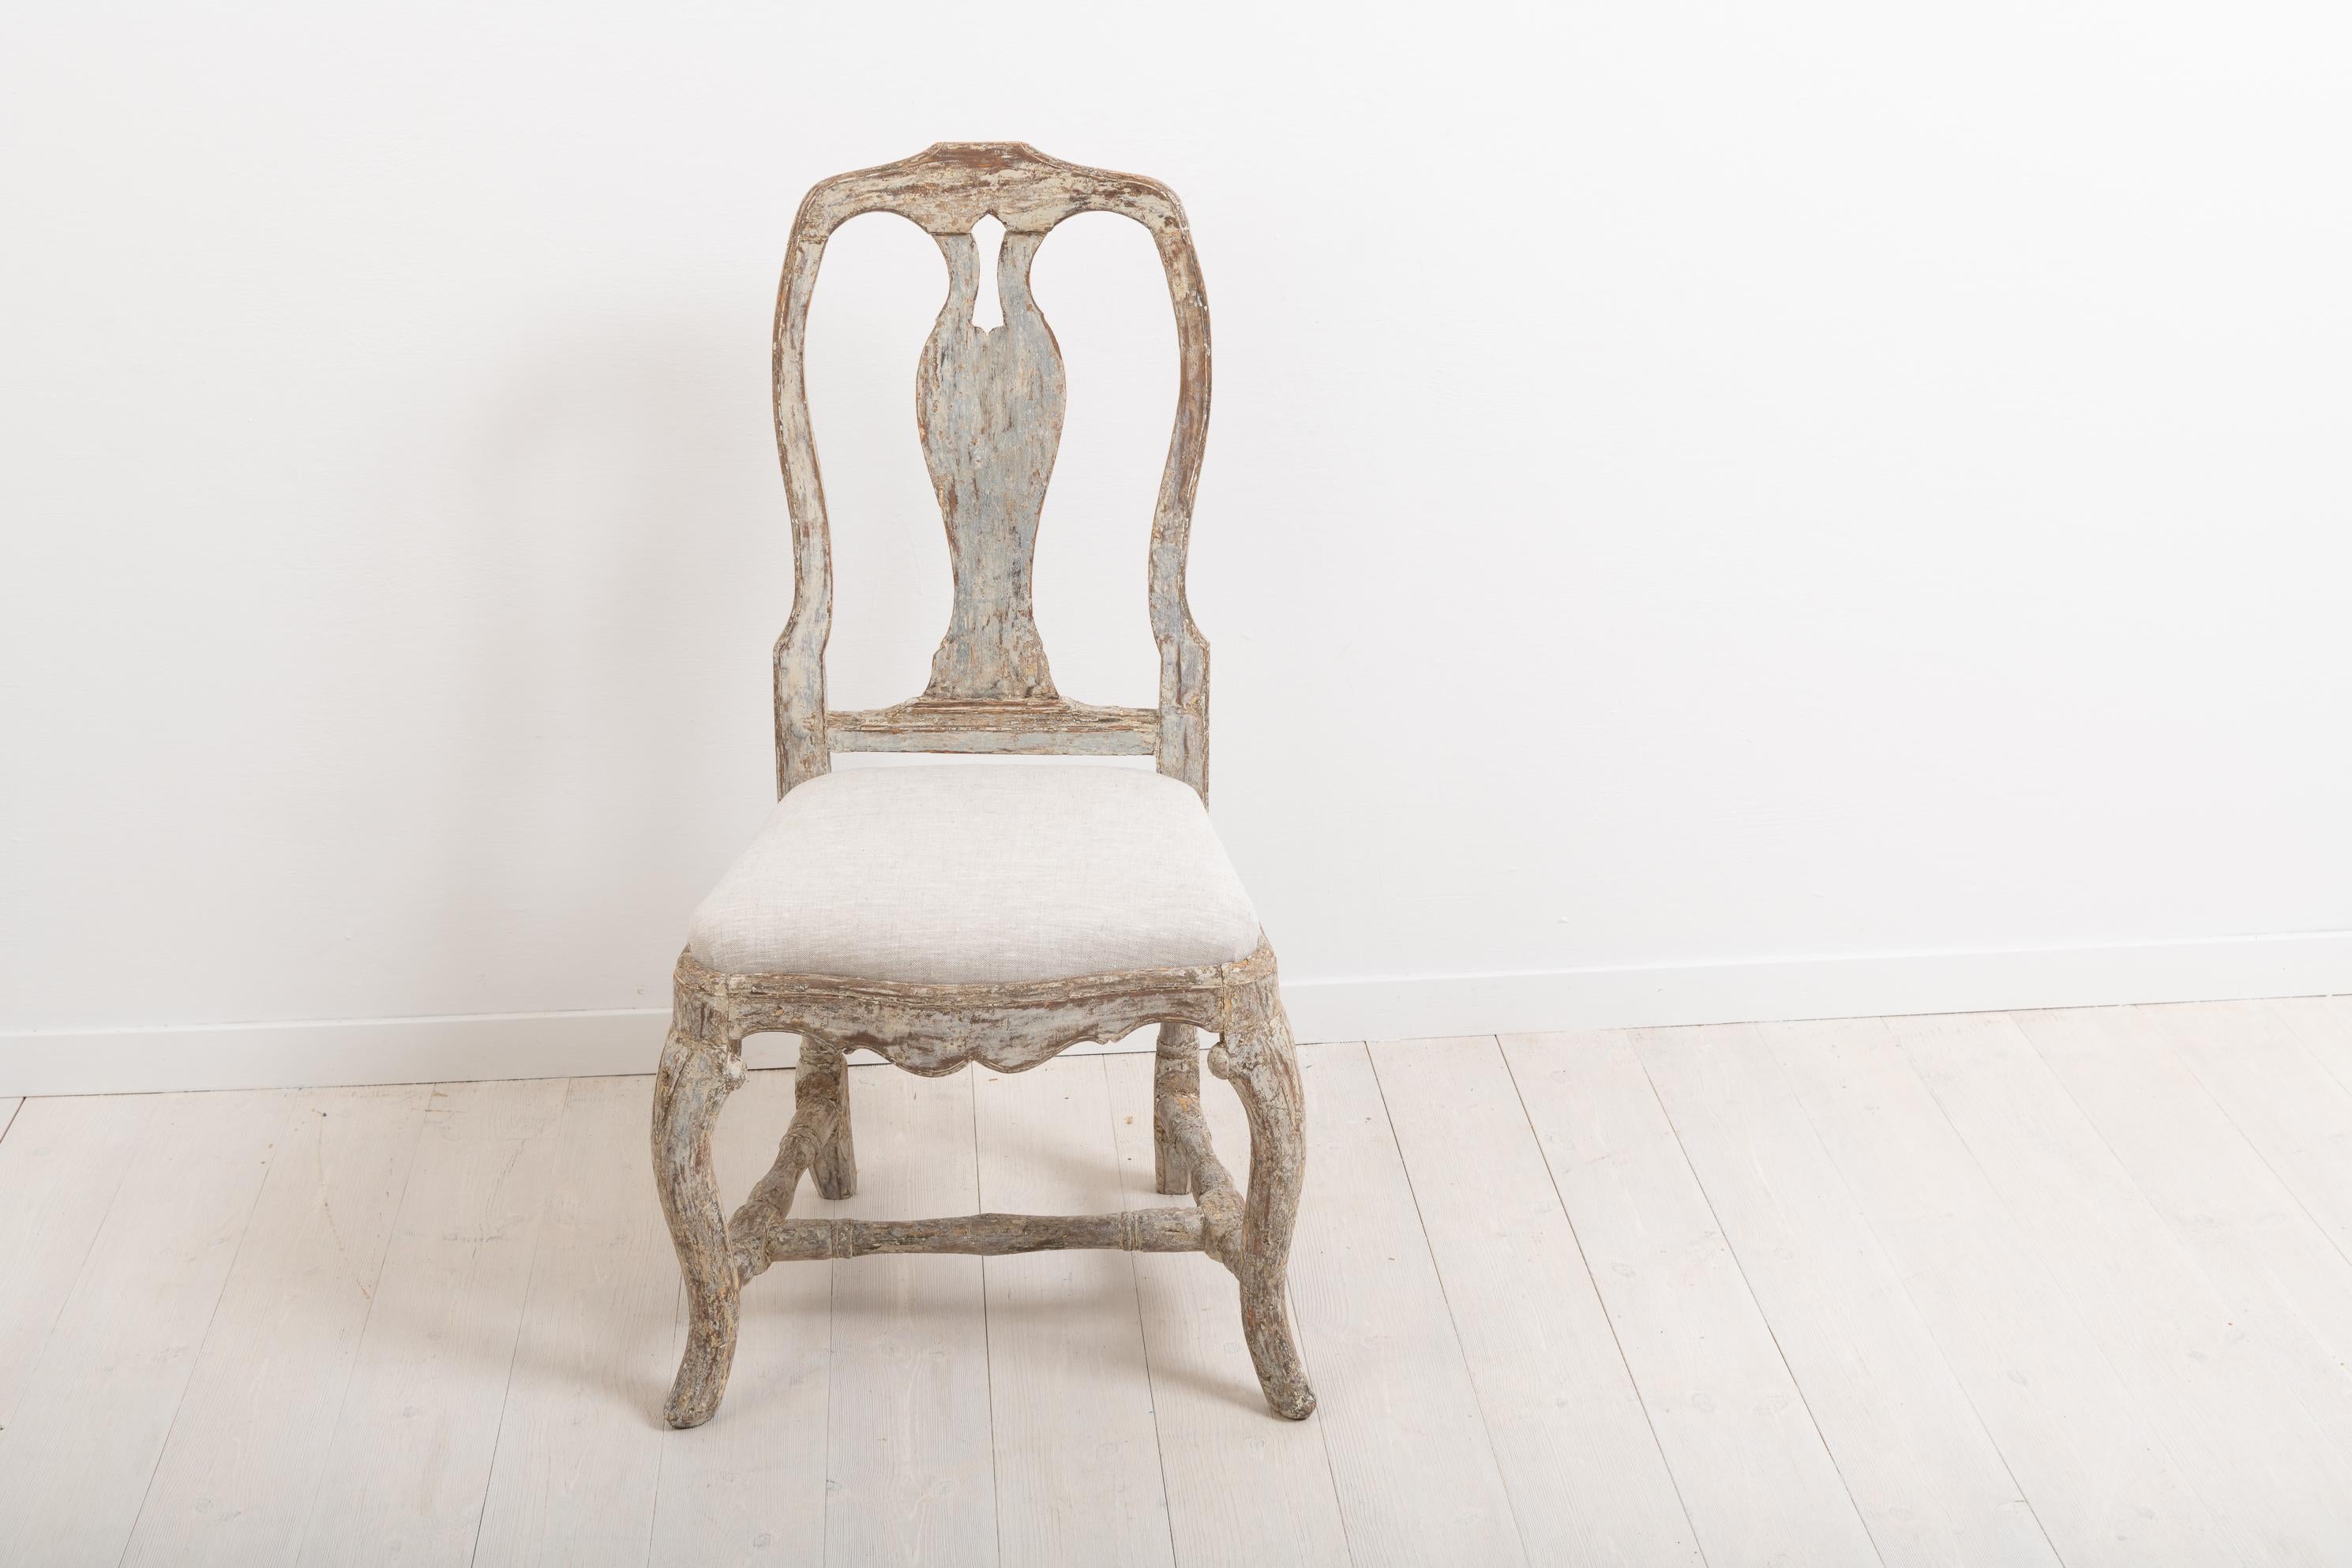 Hand-Crafted Antique Swedish Rococo Chair